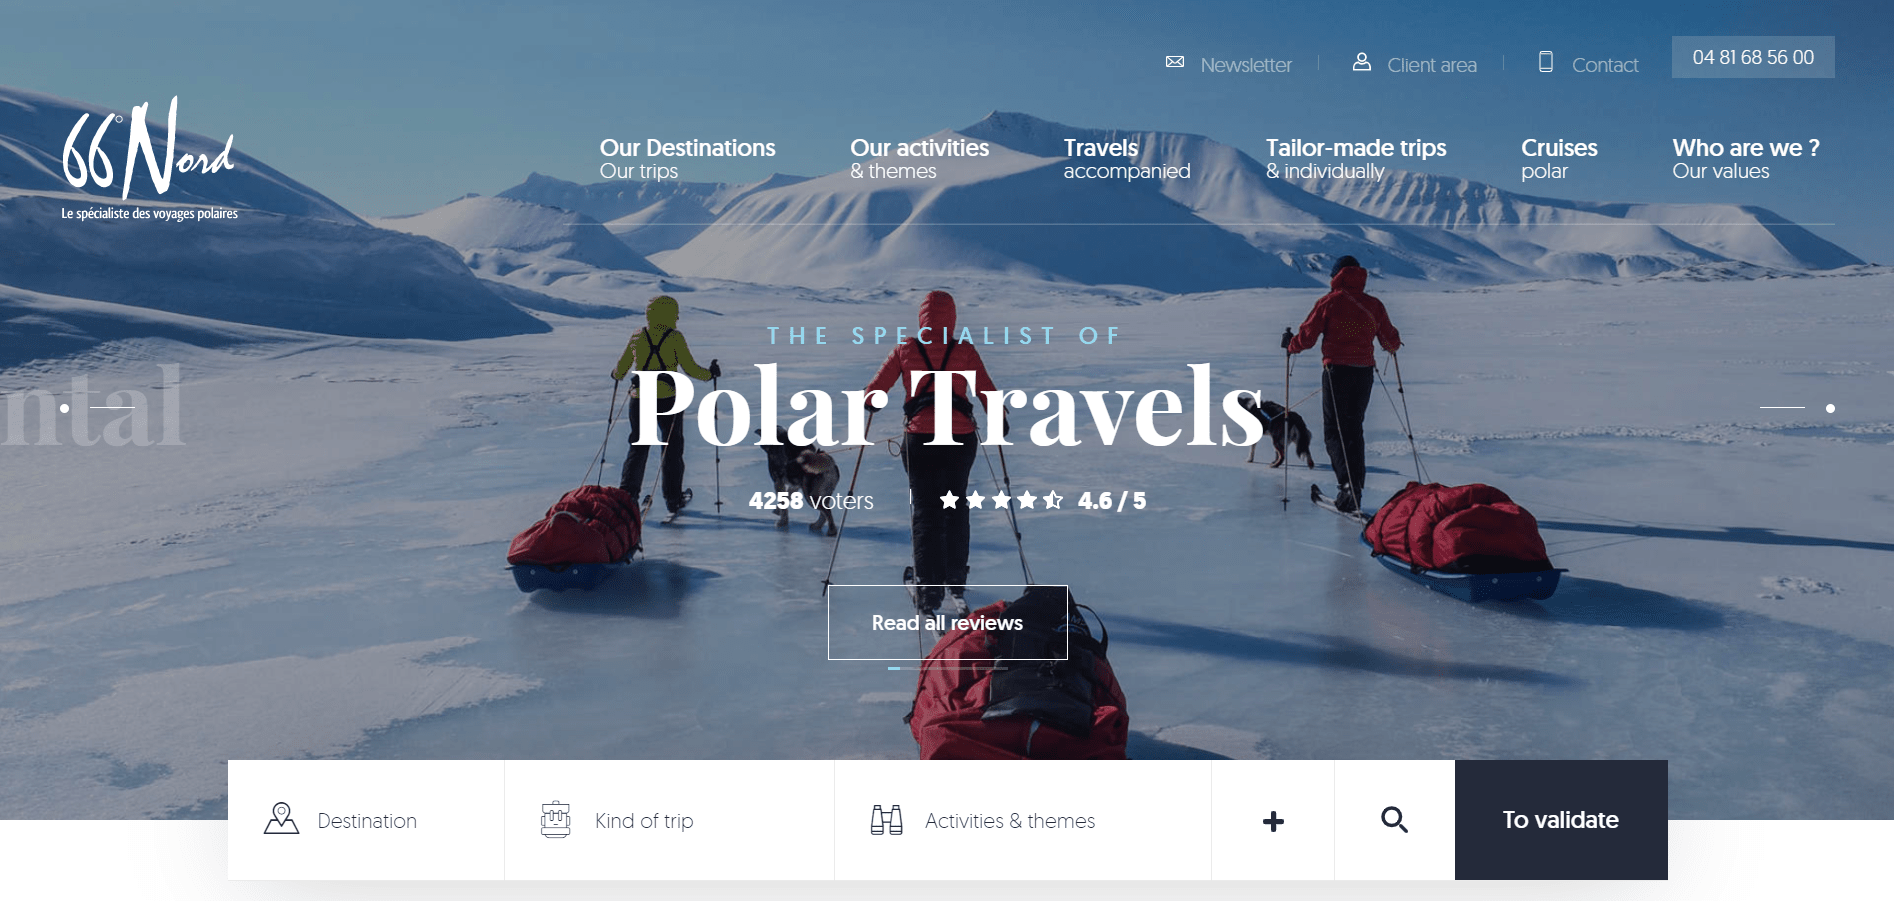 Landing page of 66° Nord 